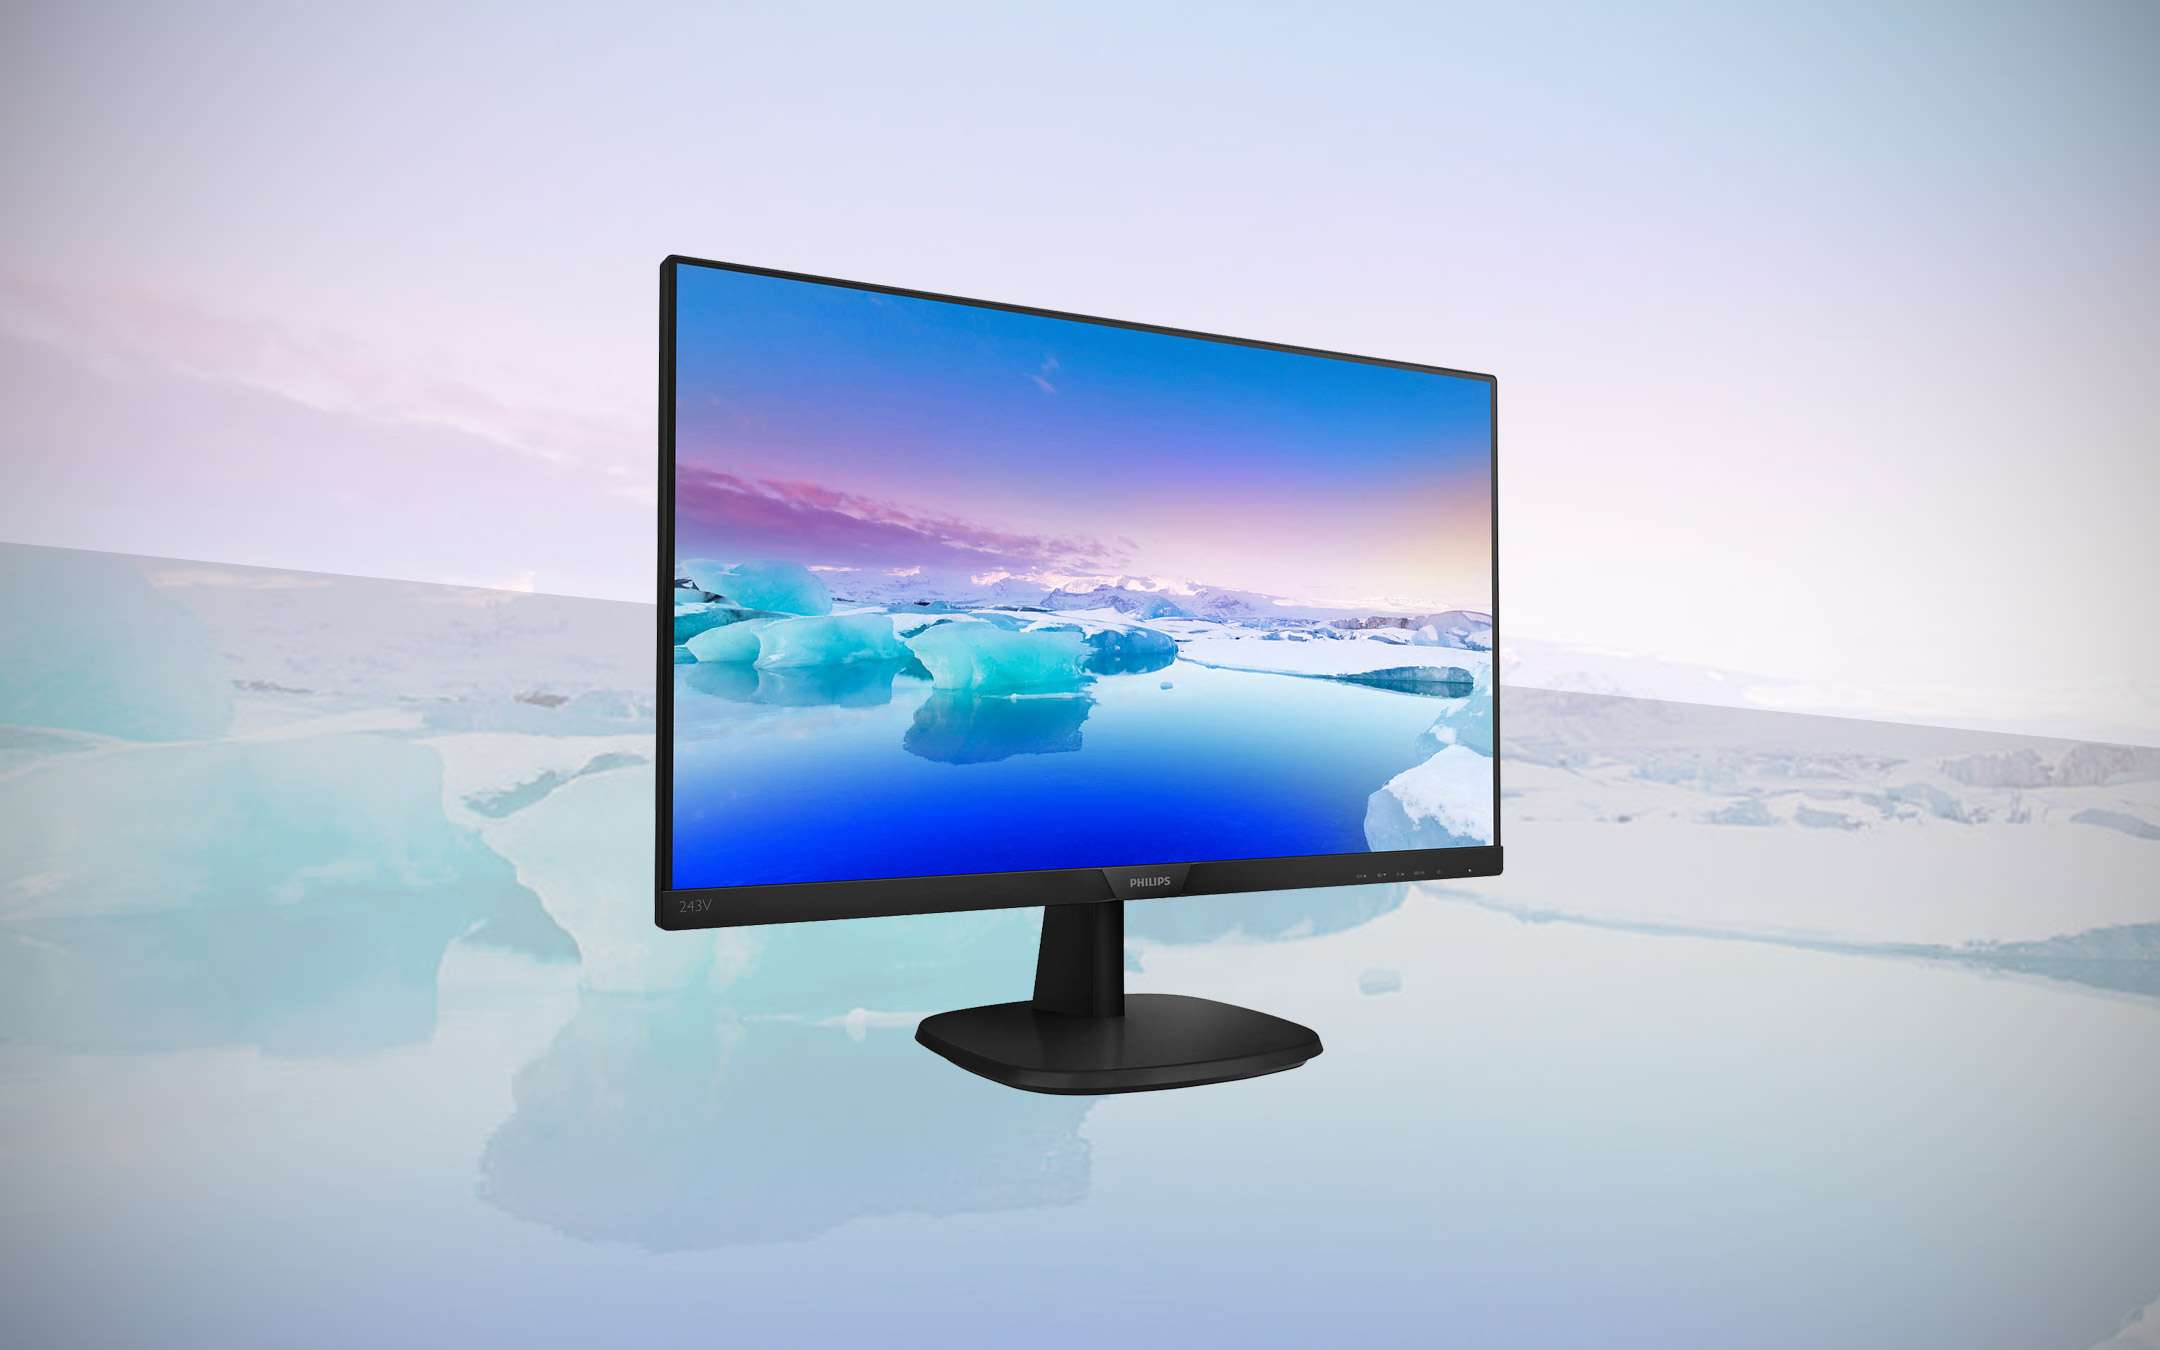 Philips 24 inch monitor at -42% on eBay